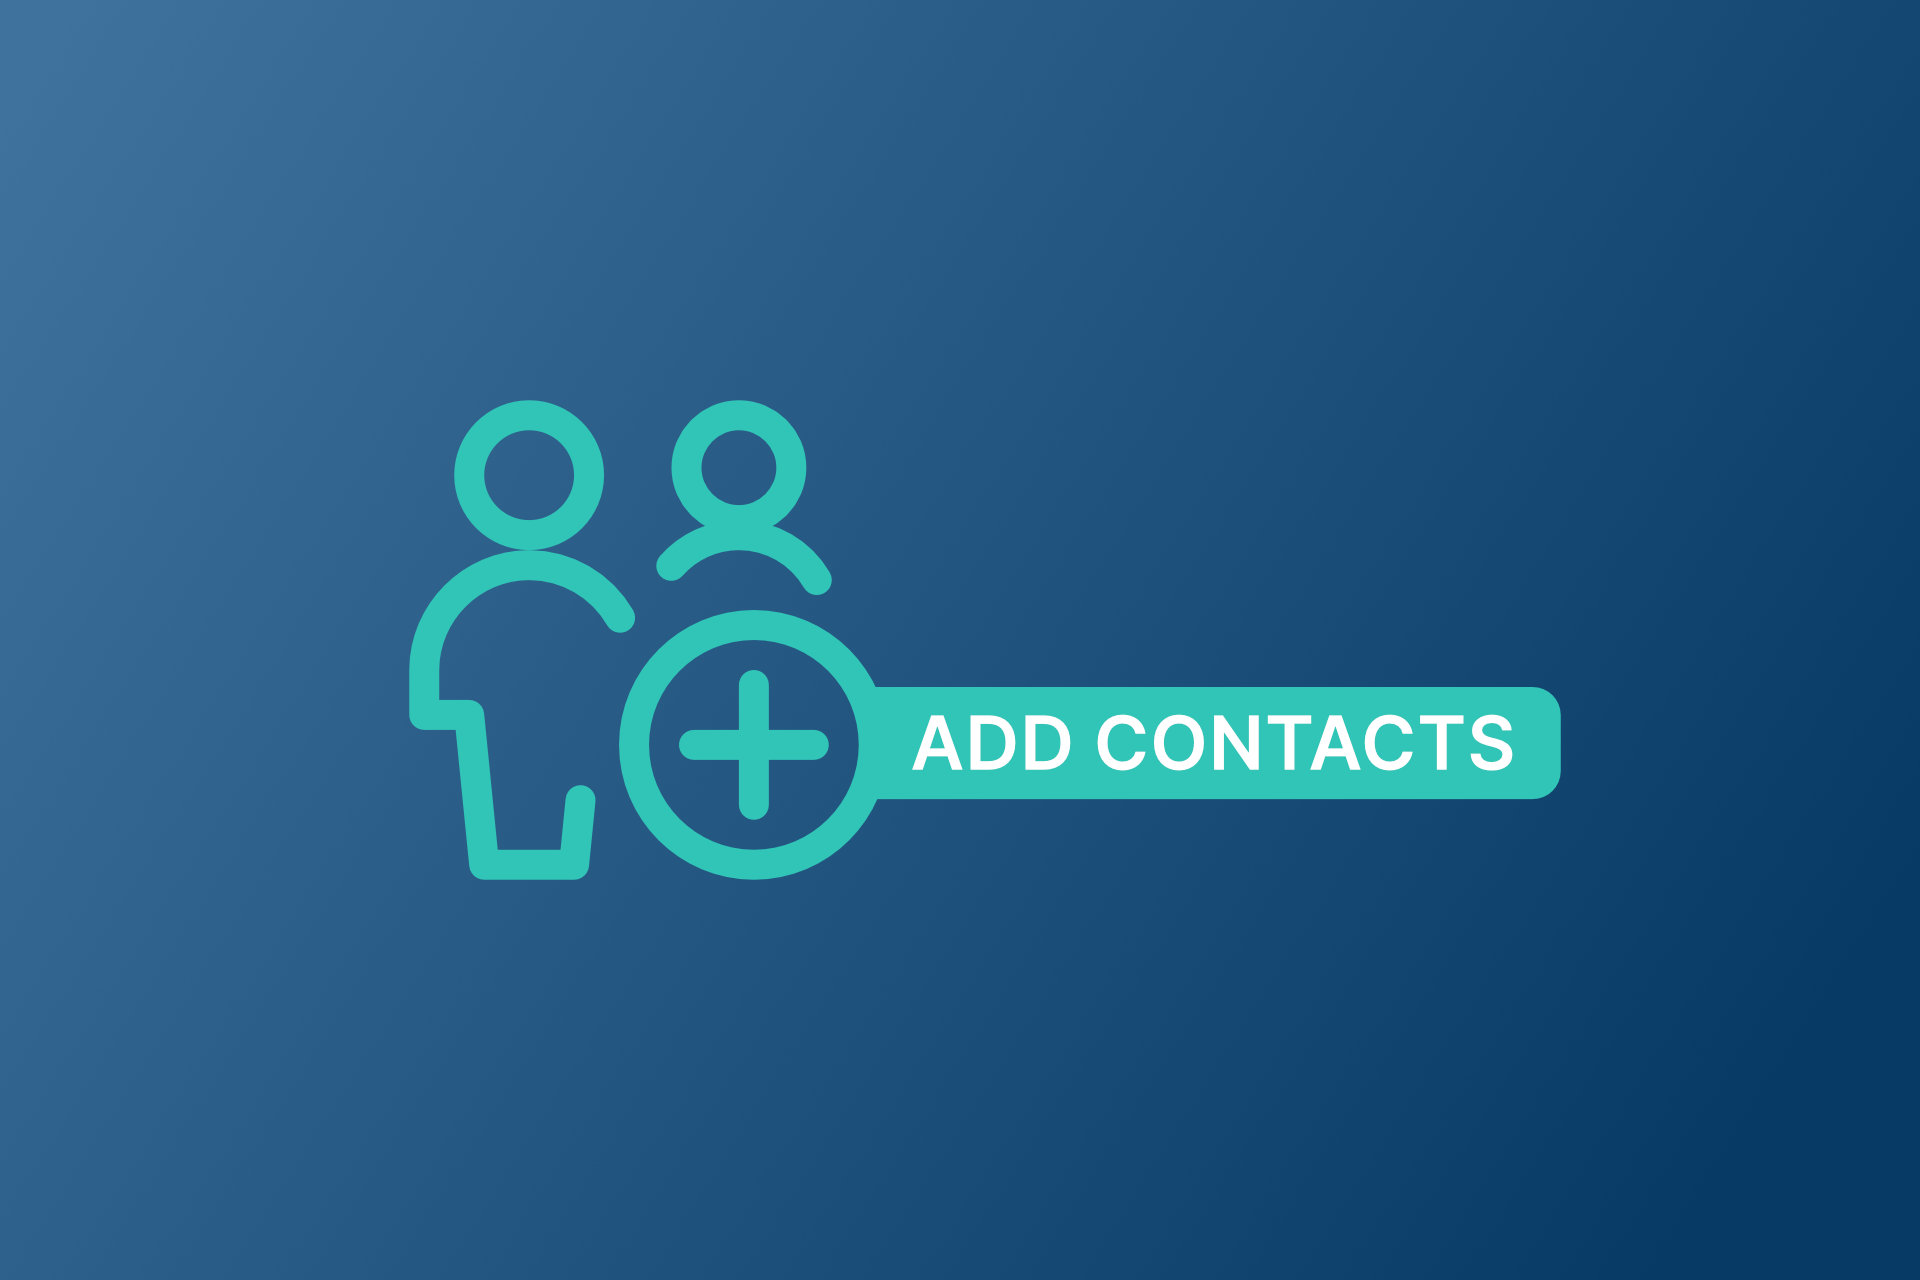 people icon with label saying add contacts